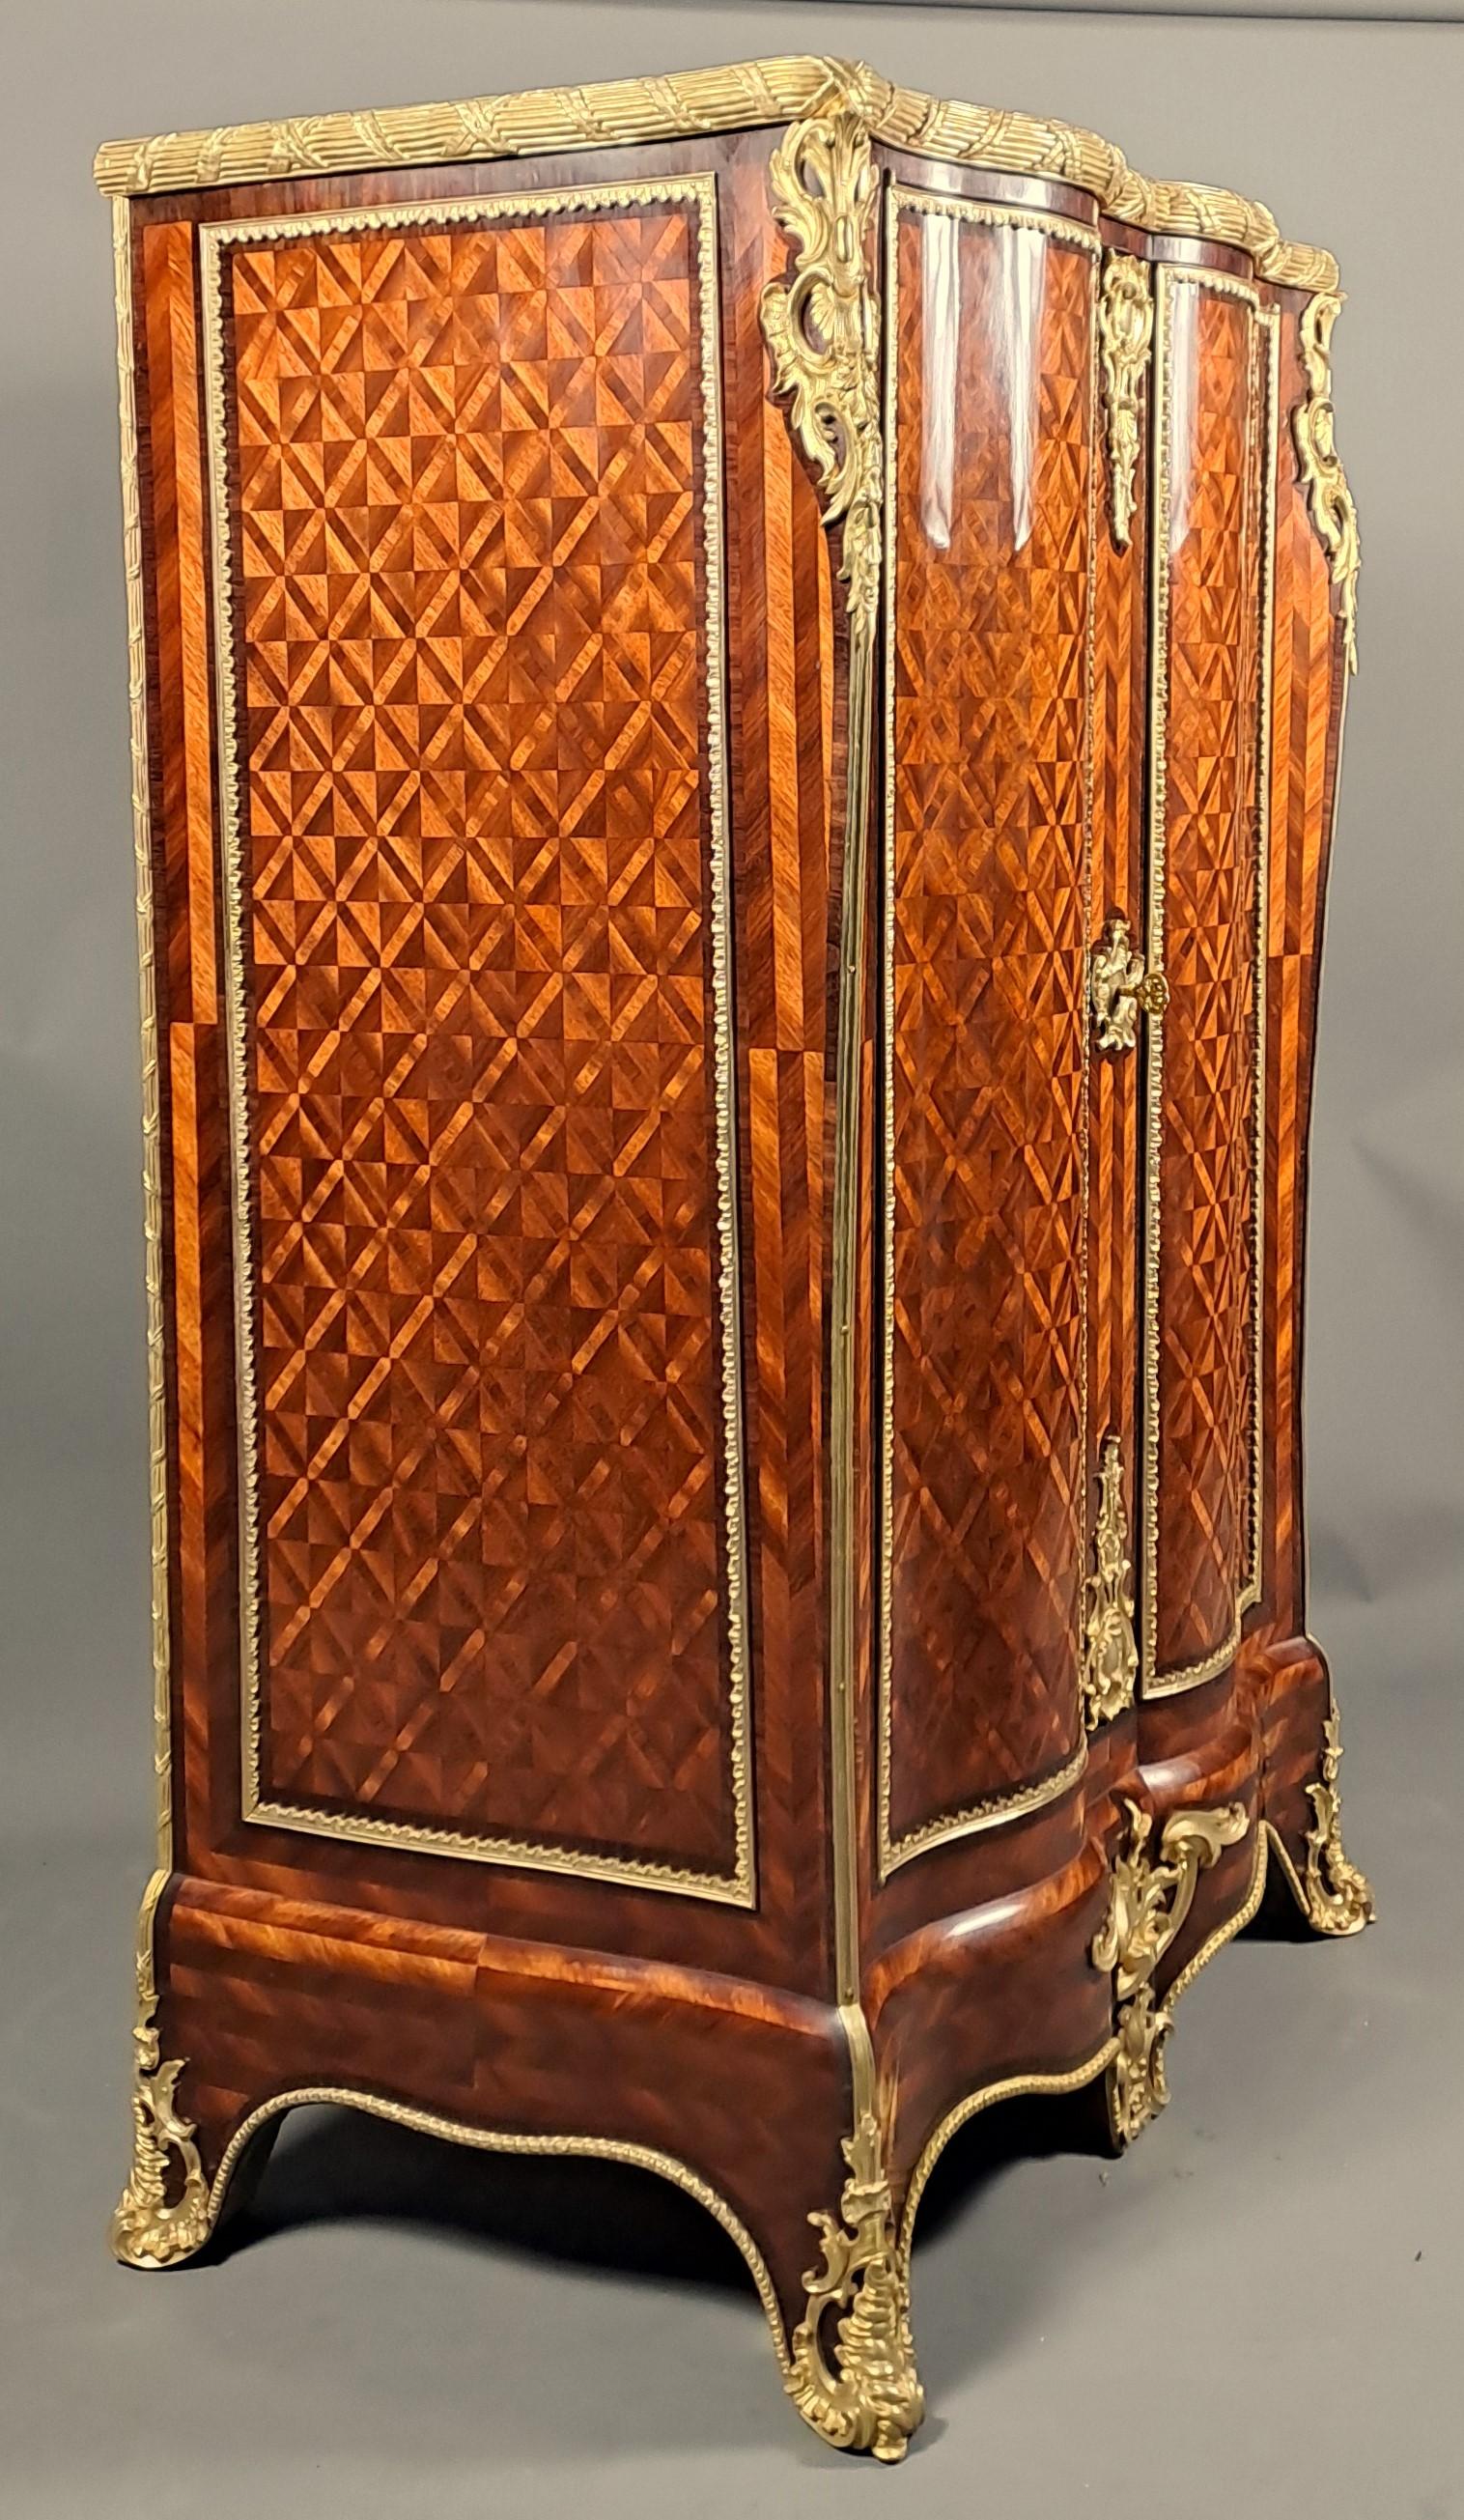 Important Cabinet Stamped Beurdeley In Paris 1